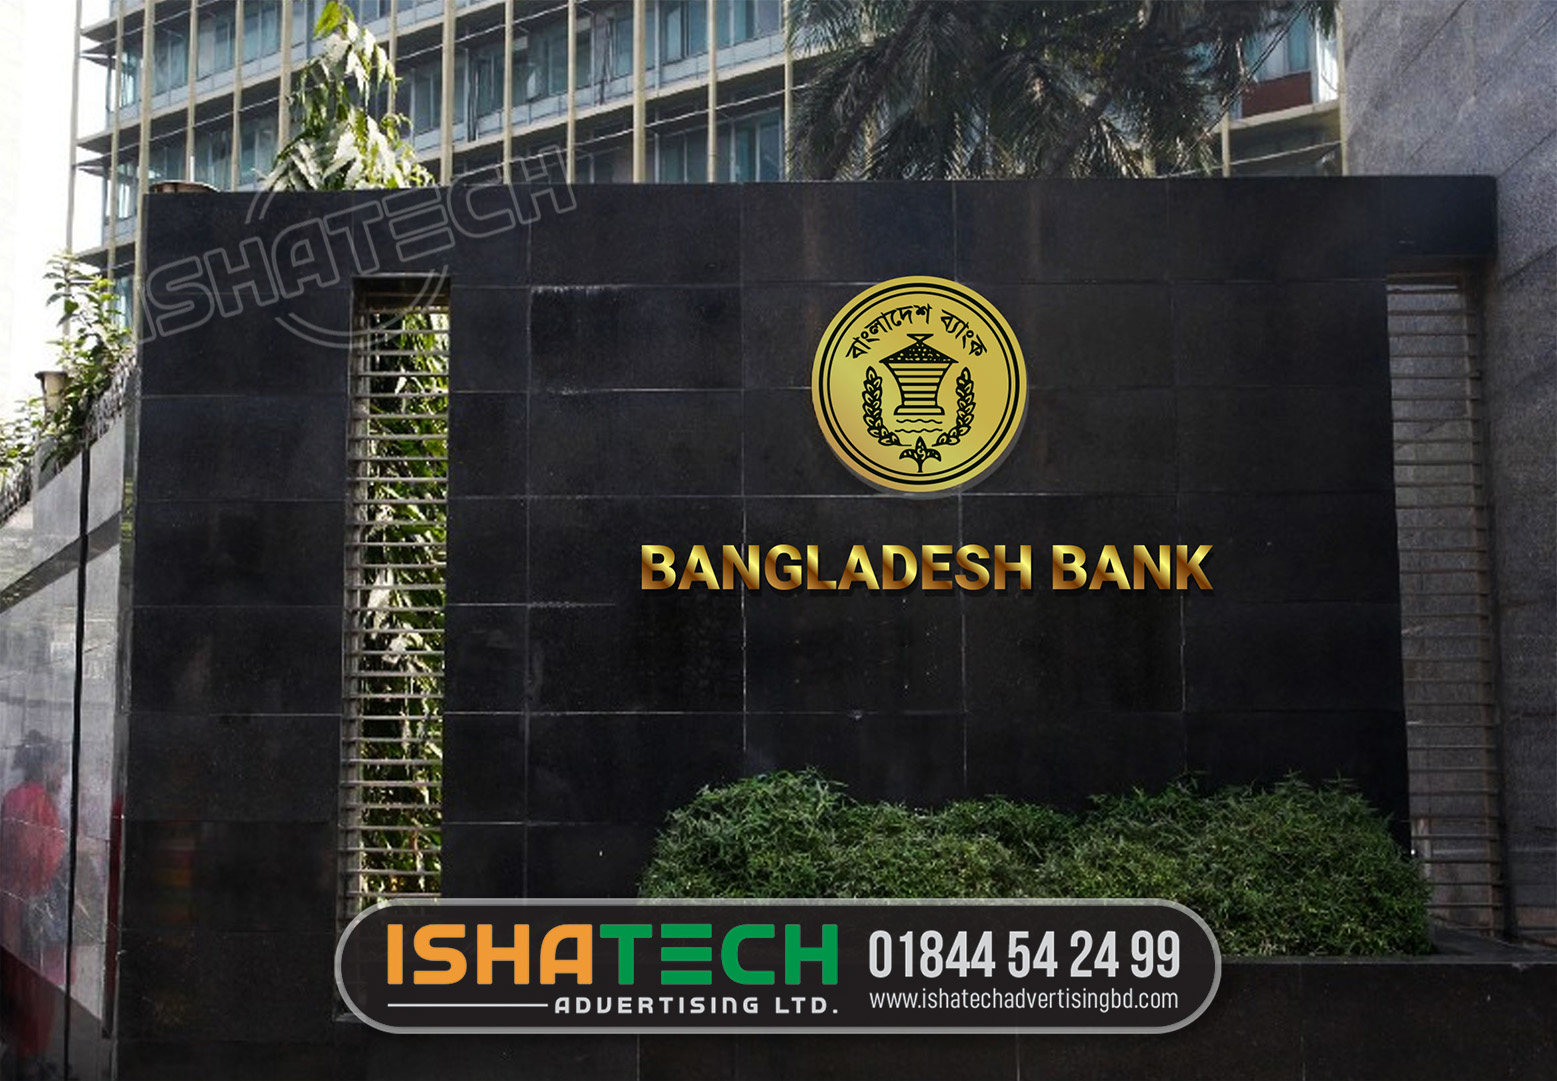 Bangladesh Bank Frontlit Acrylic 3D Letter Signboard has been made by Ishatech Advertising Ltd.